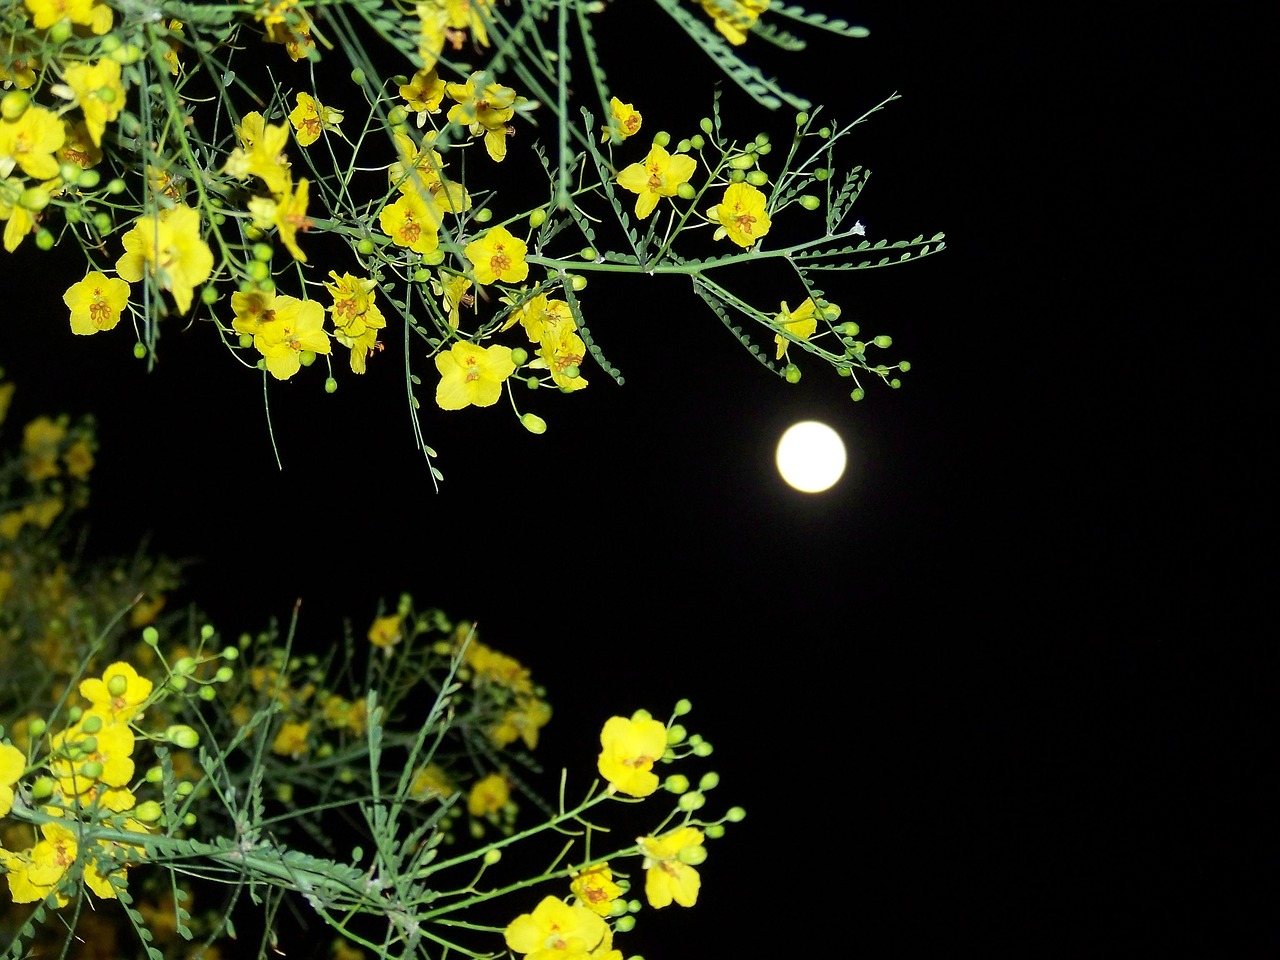 blooming branches night sky contrast free photo